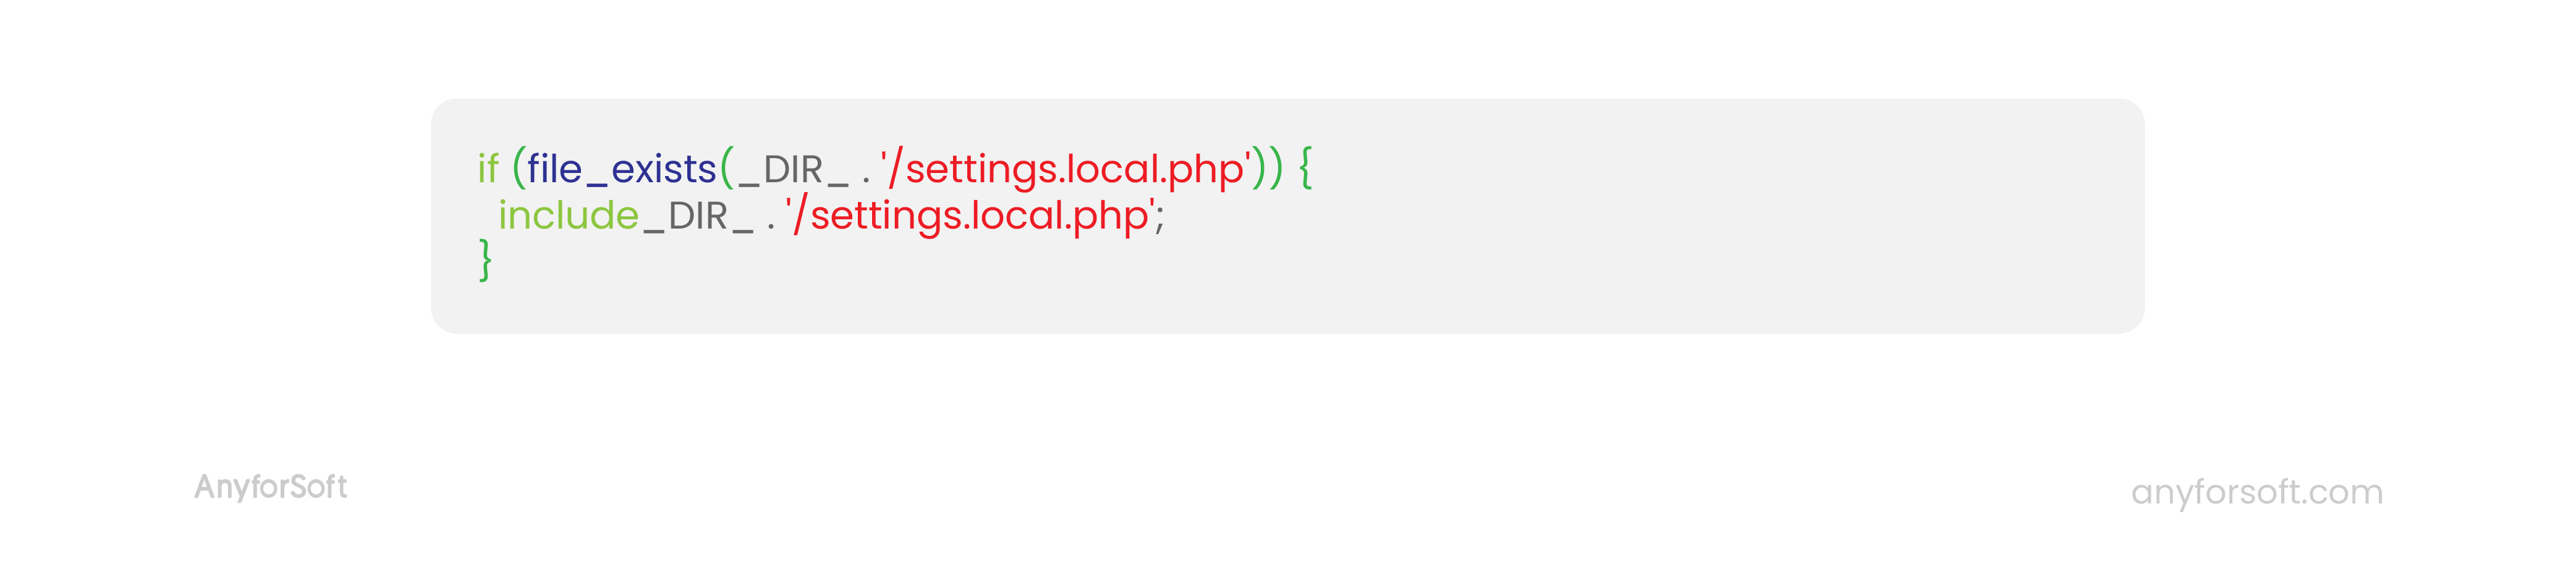 settings.local.php